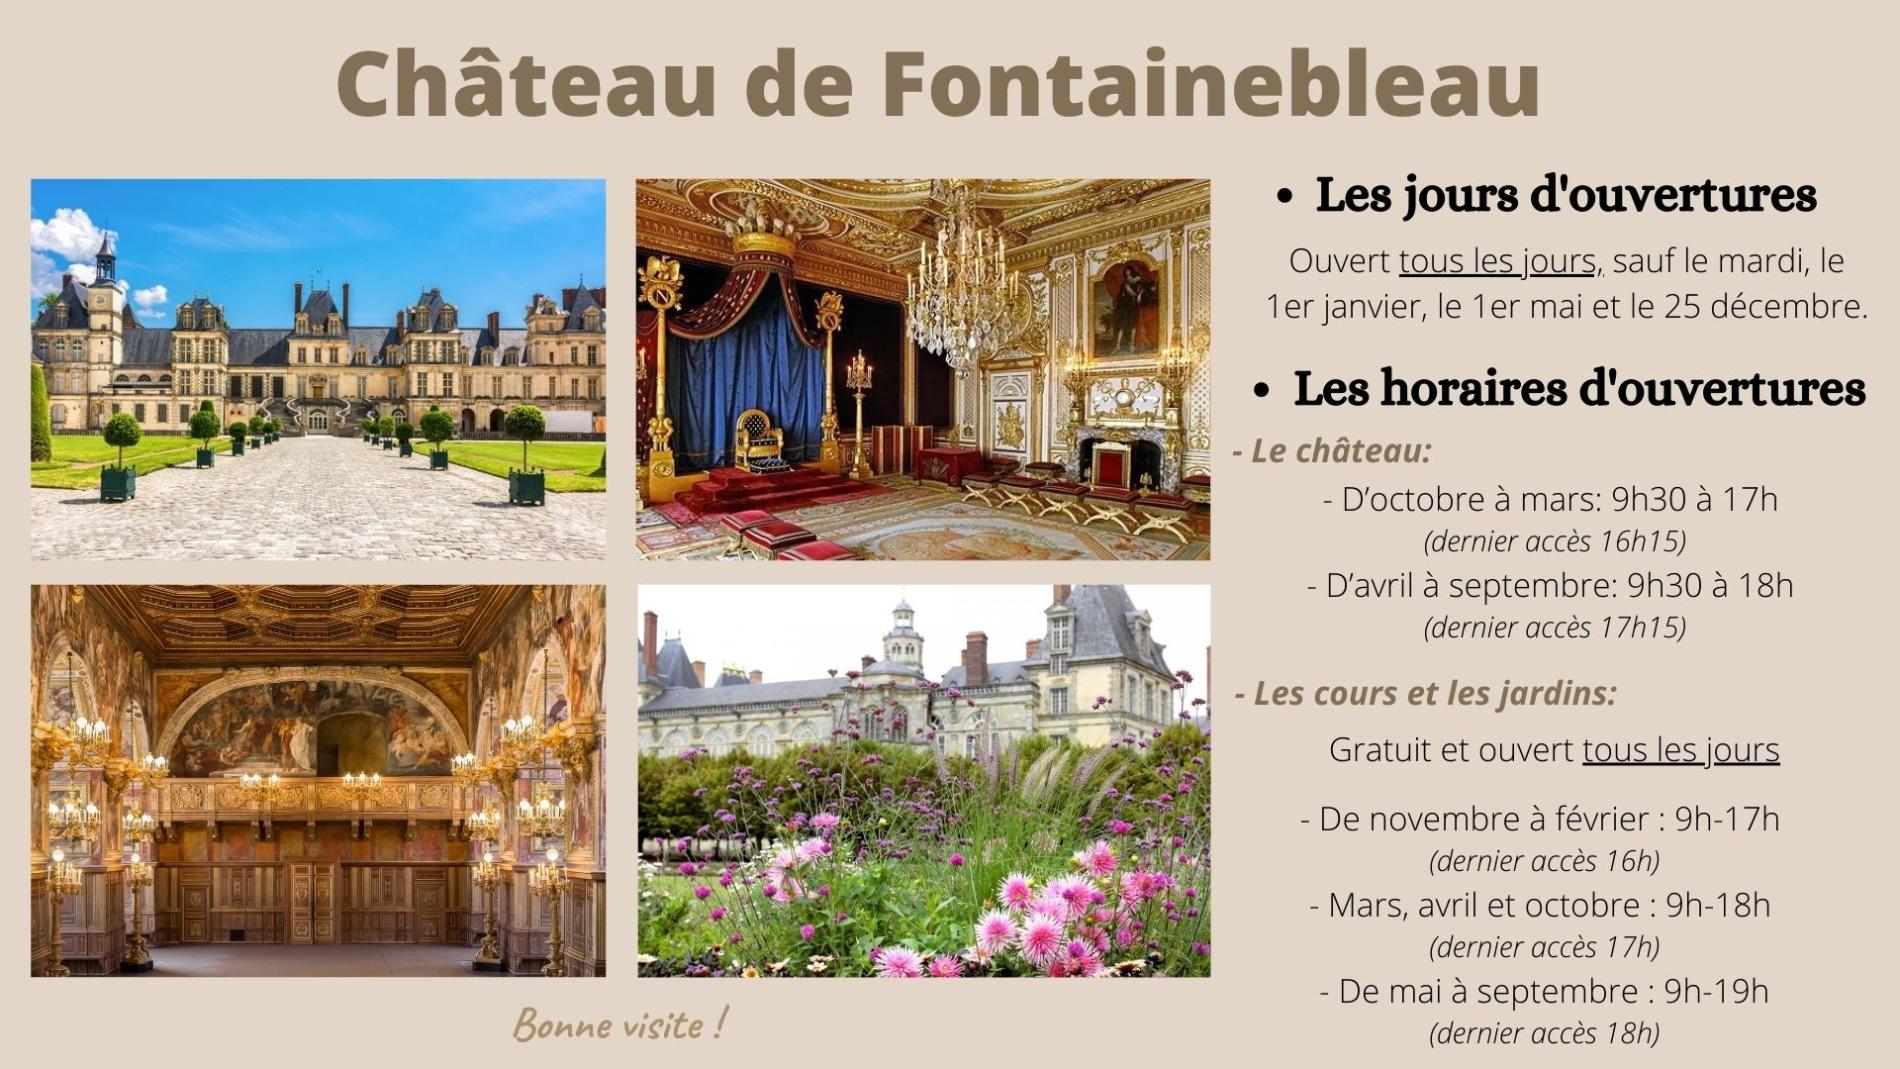 Château de Fontainebleau the home of Kings, the home of centuries